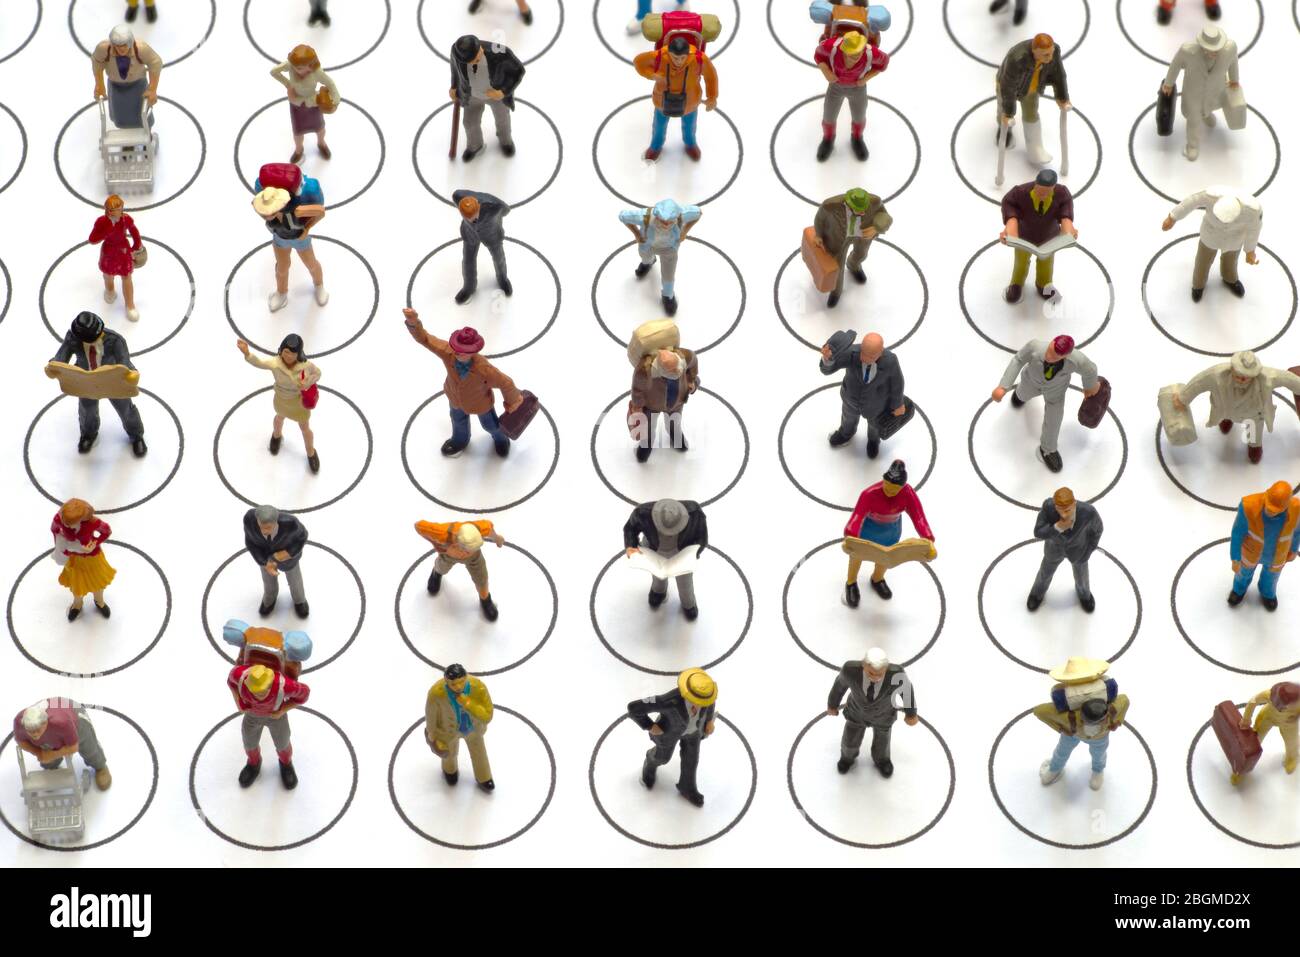 Top view, from above miniature toys - social distancing conceptual image, people distancing each other in public places to avoid infection. Stock Photo